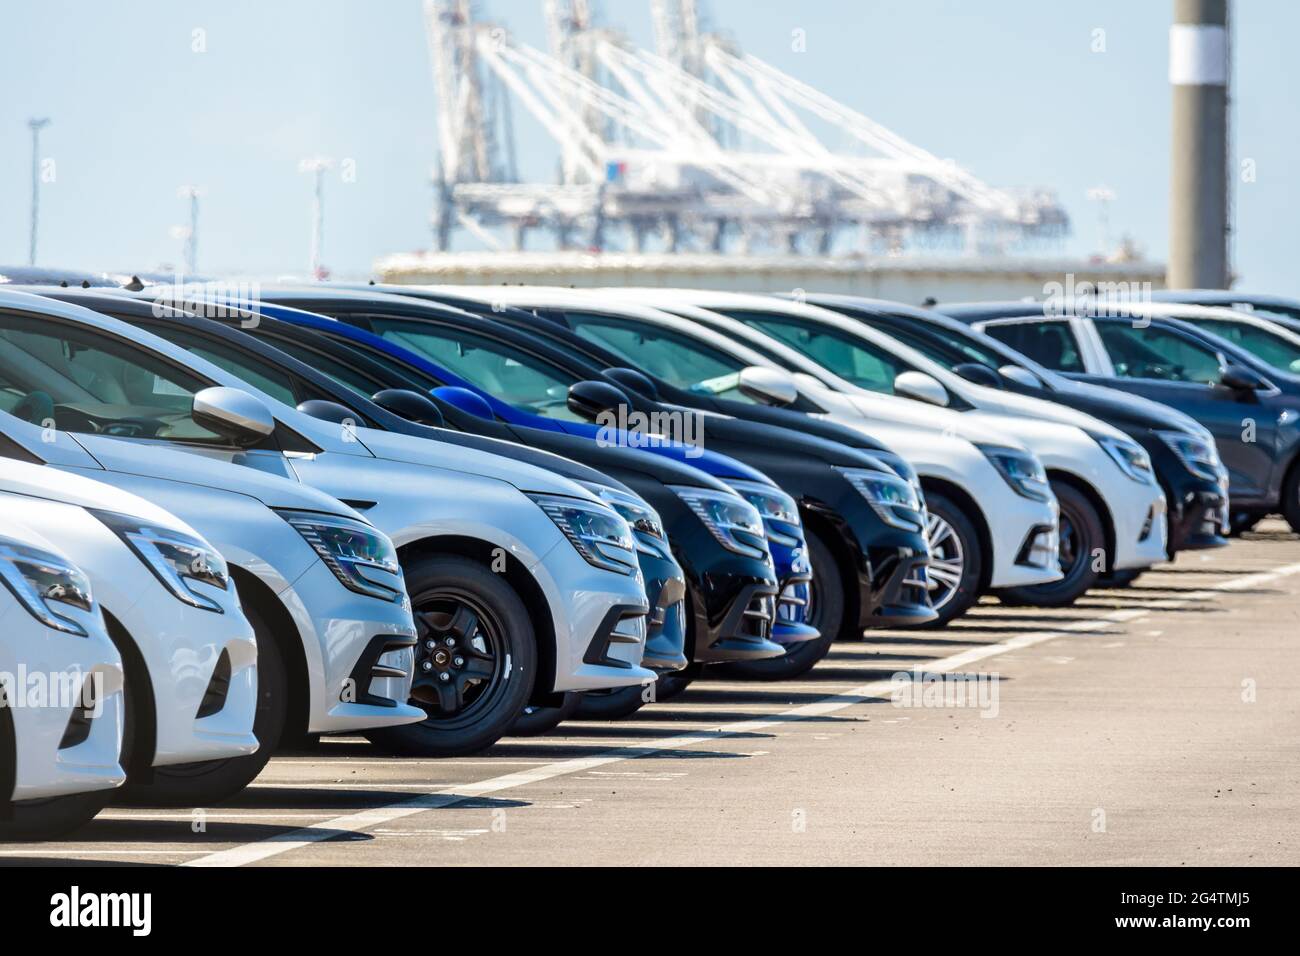 Row of brand new cars lined up outdoors in a parking lot with container cranes in the distance. Stock Photo